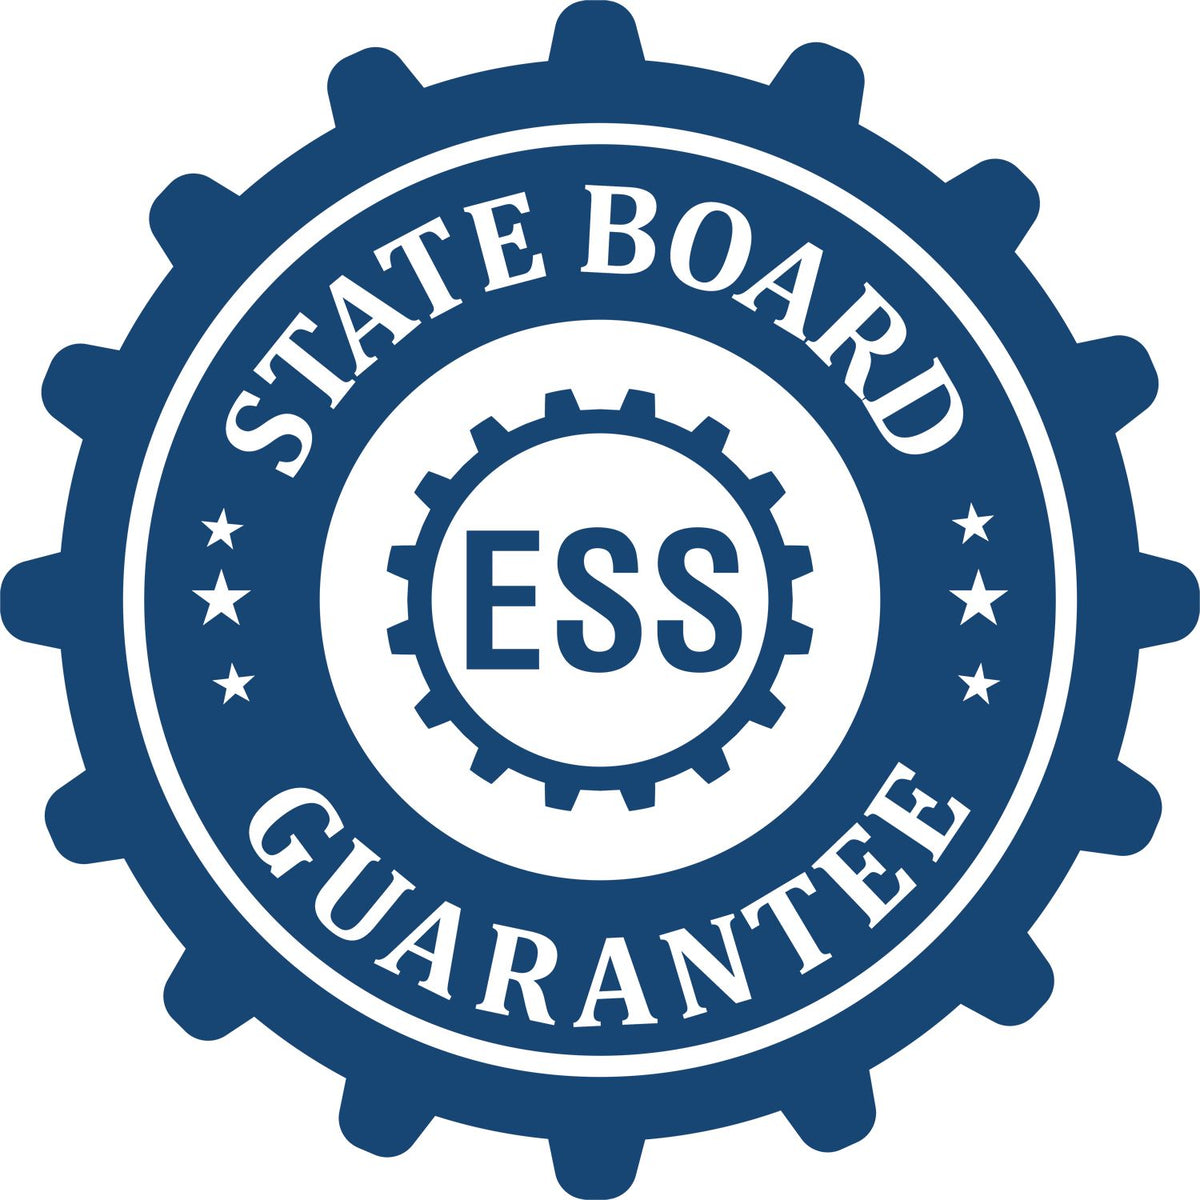 An emblem in a gear shape illustrating a state board guarantee for the Digital Maine Landscape Architect Stamp product.